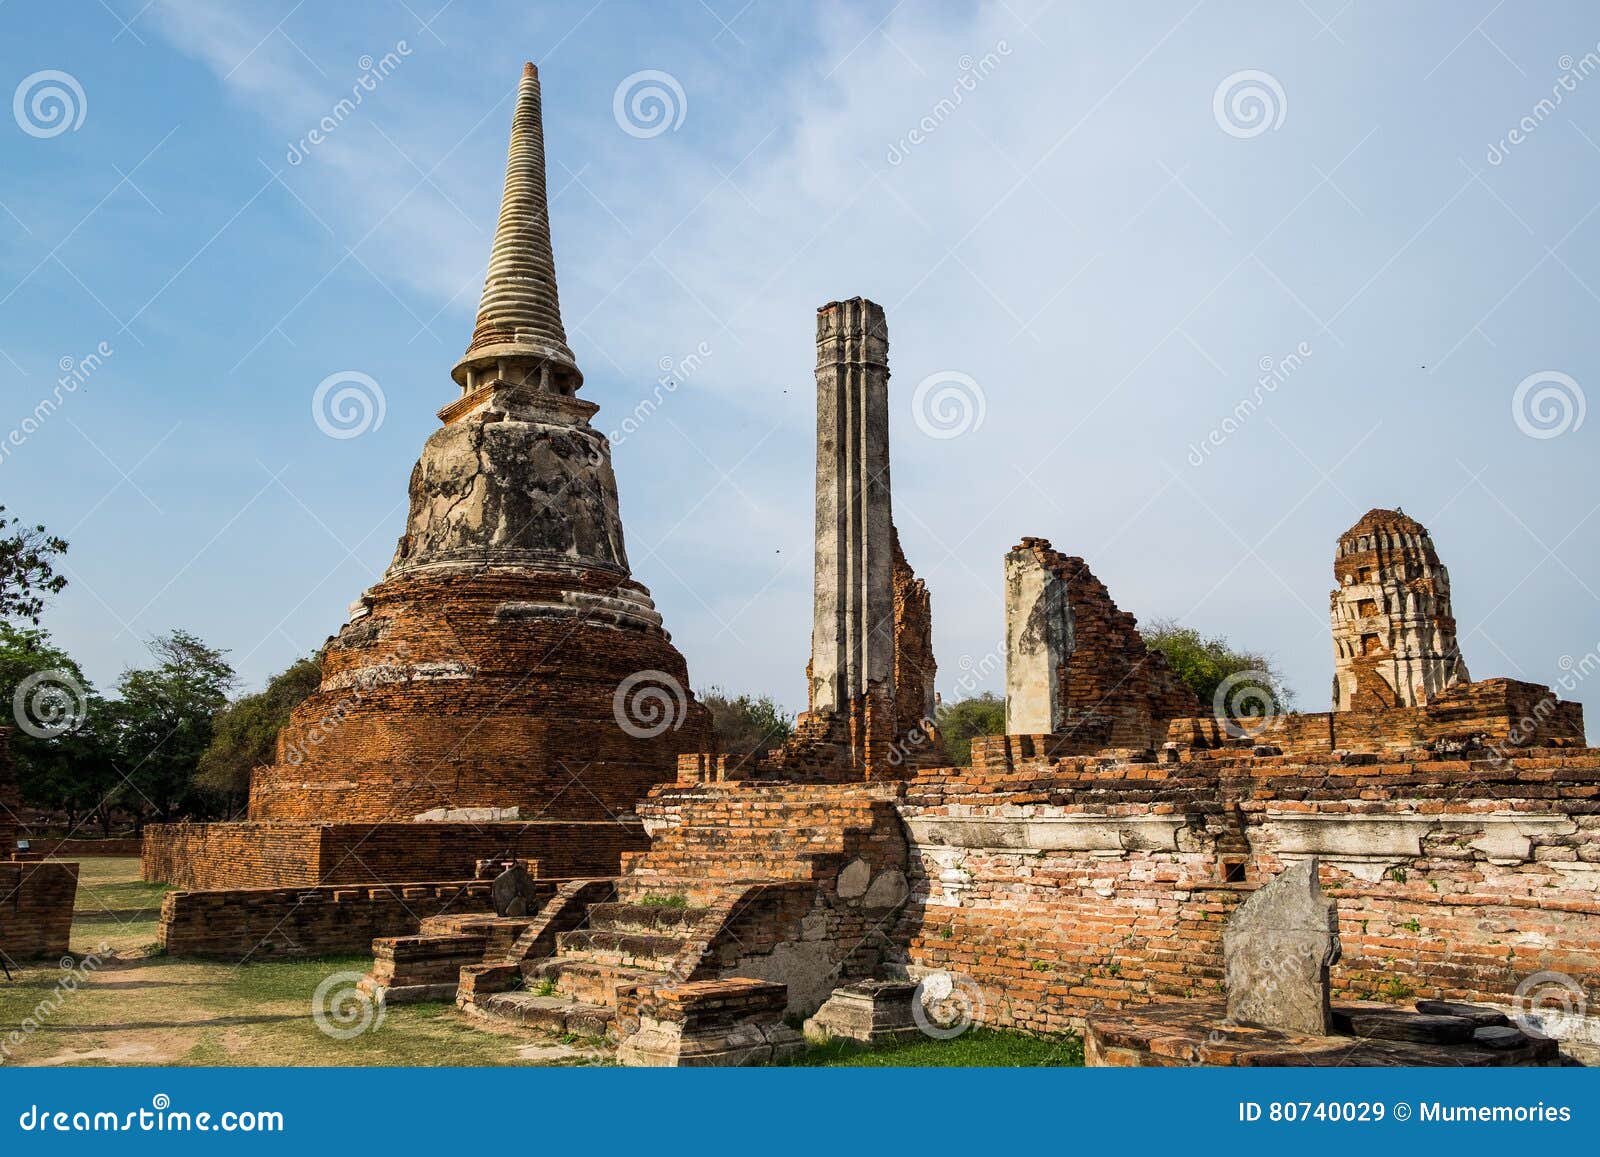 temple pagoda ancient ruins invaluable